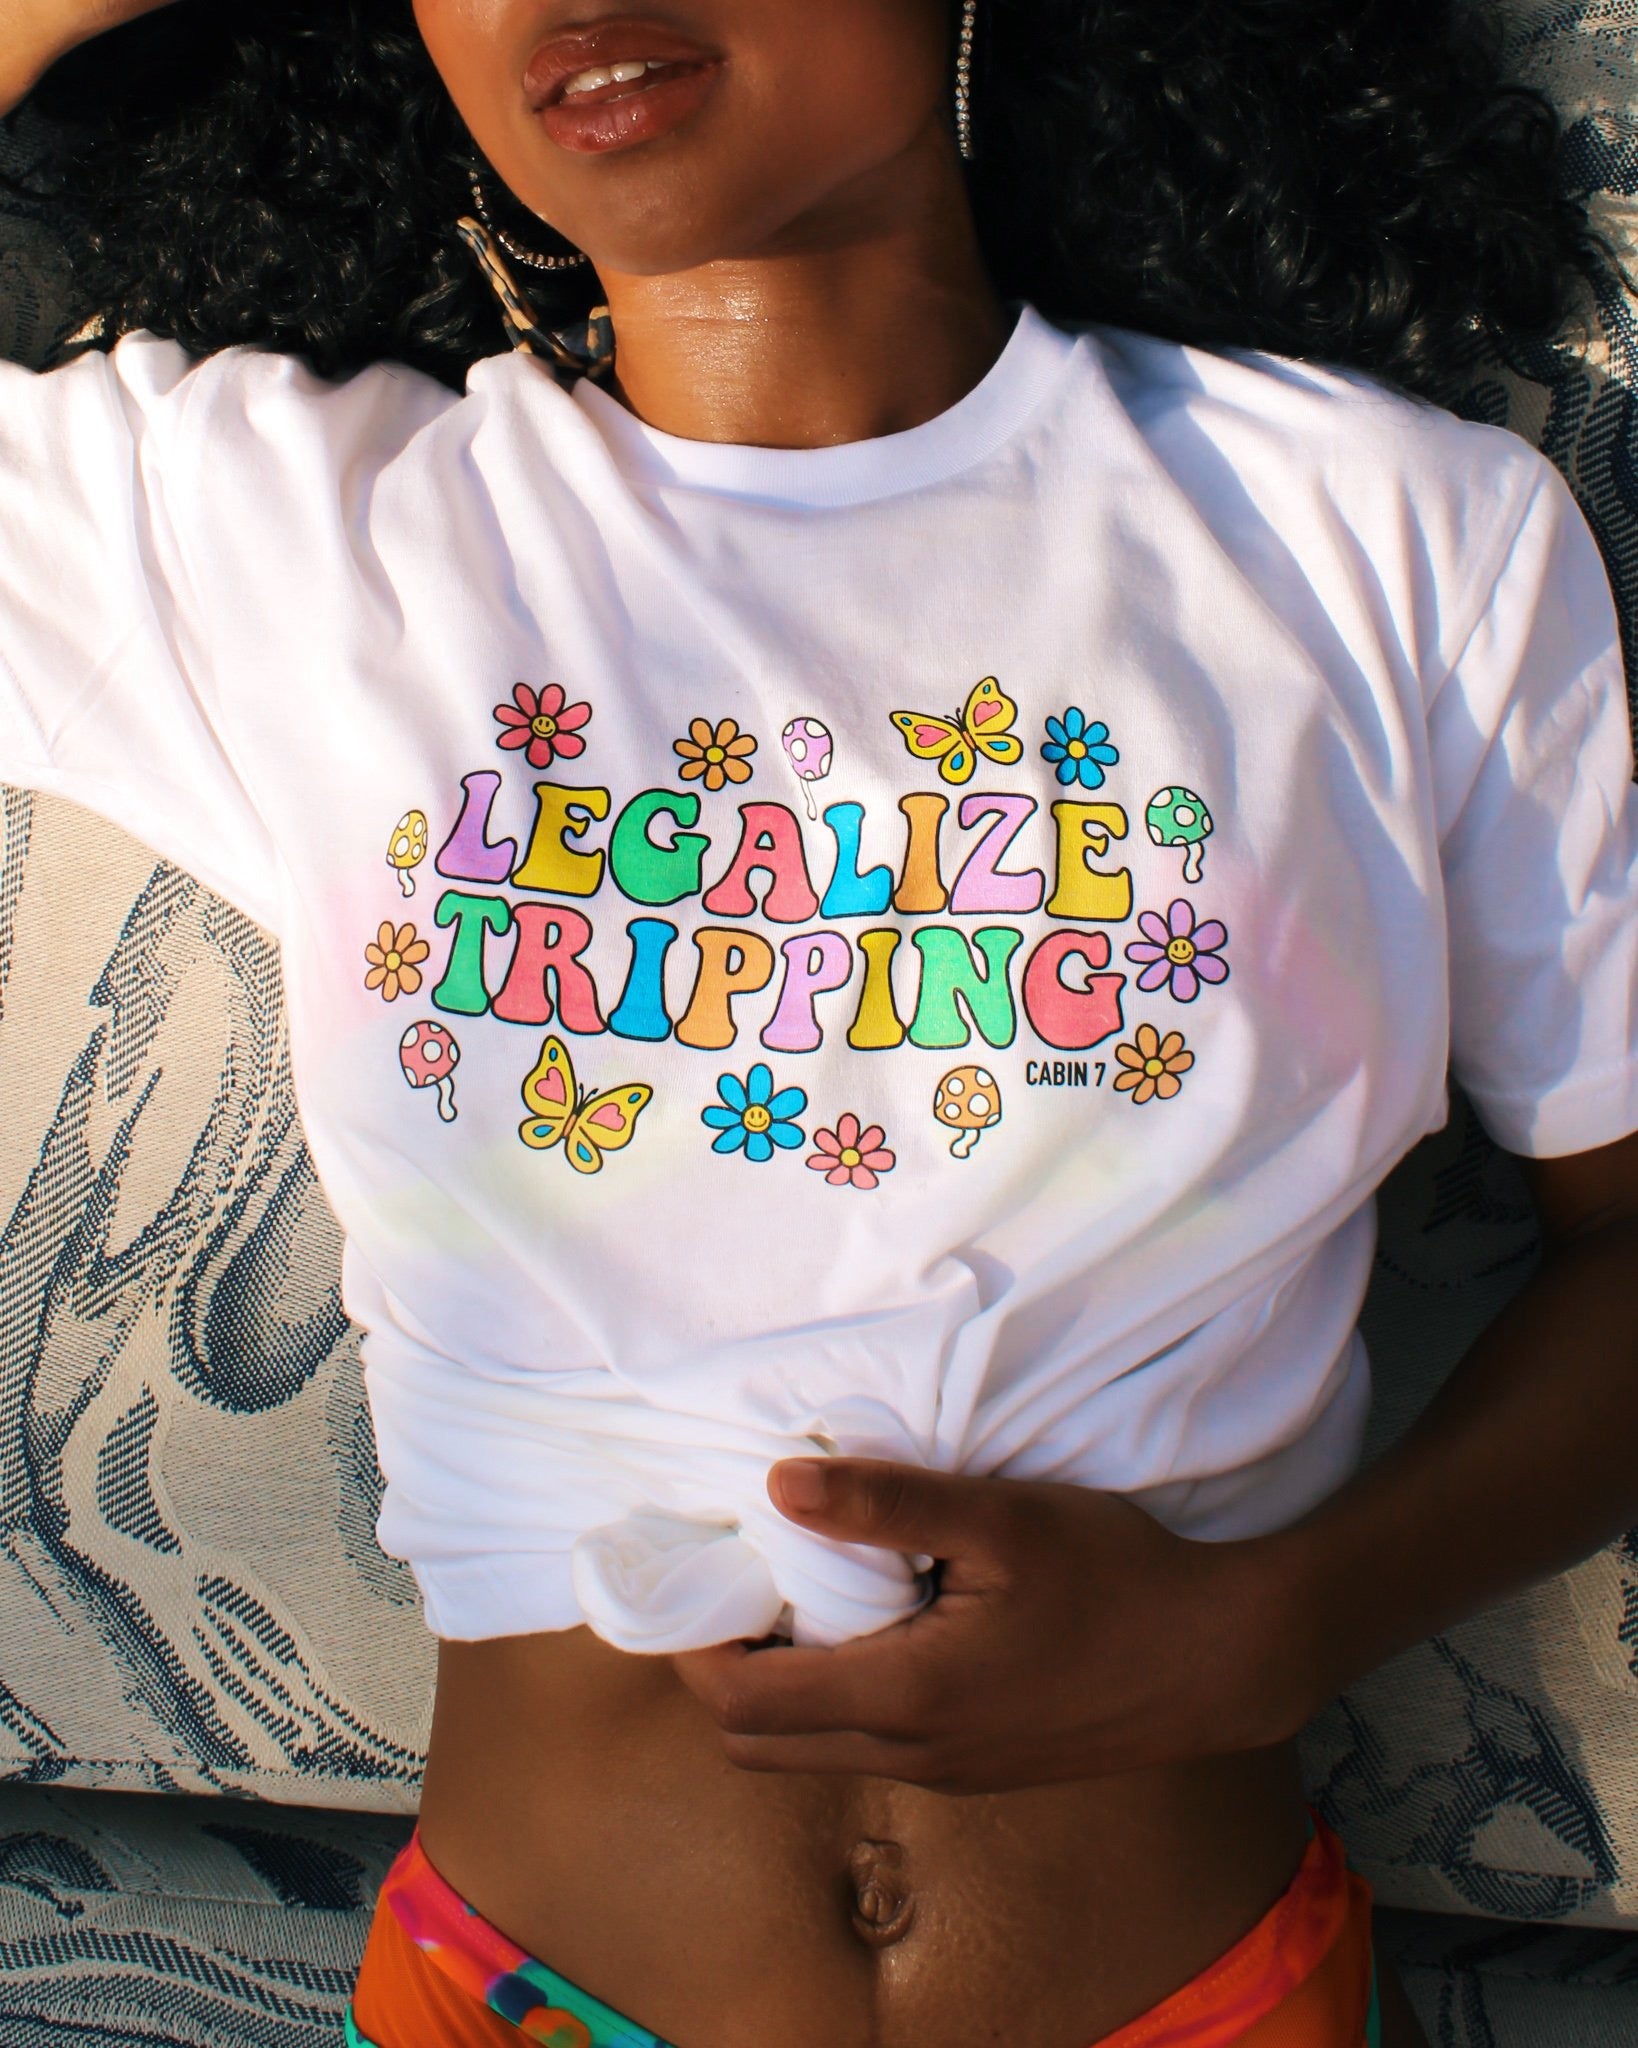 Legalize Tripping T-Shirt